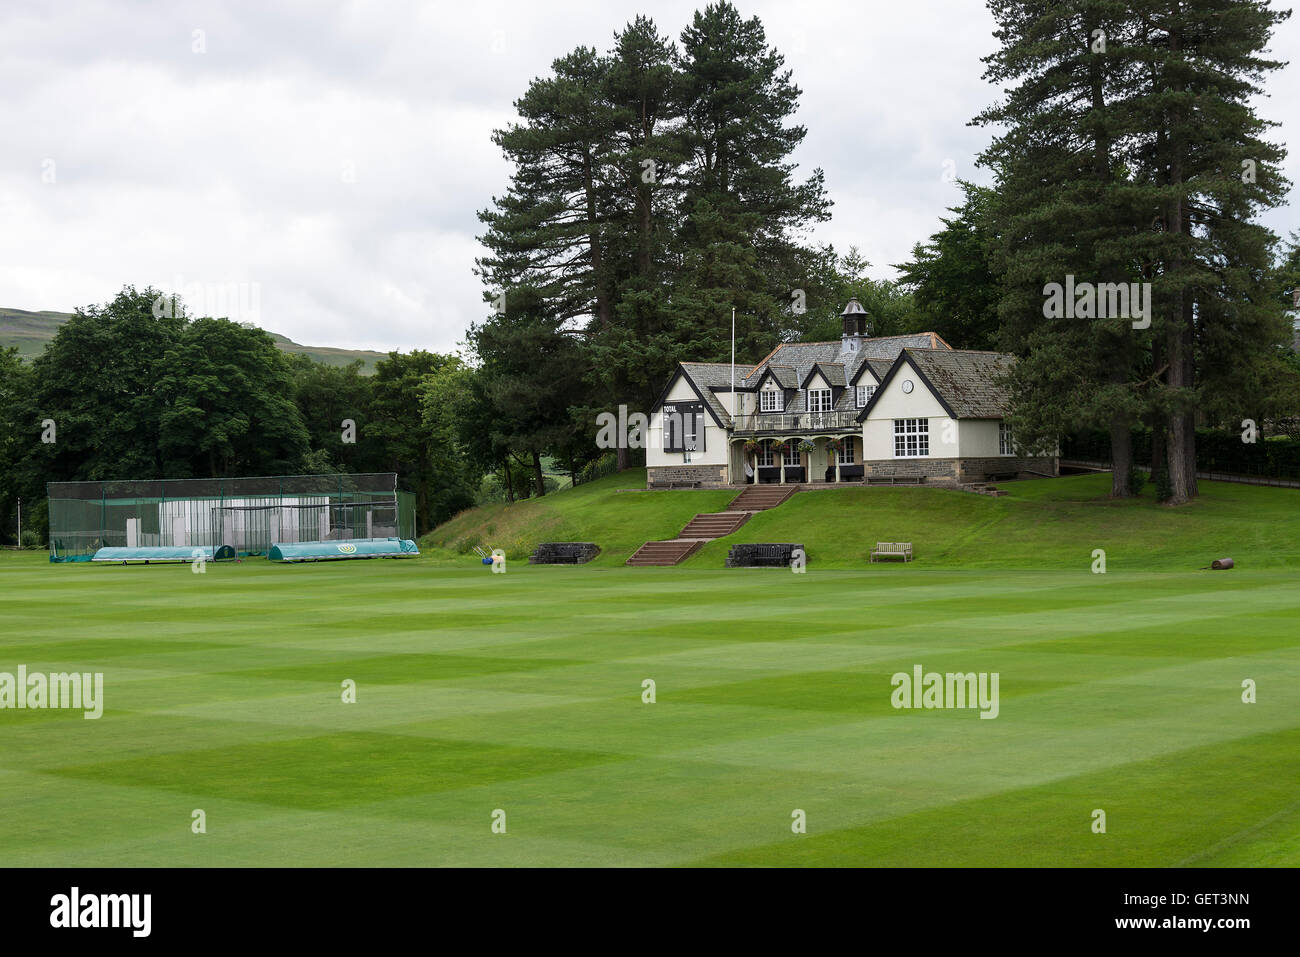 The Traditional Cricket Pavilion and Cricket Ground at Sedbergh School in Cumbria England United Kingdom UK Stock Photo